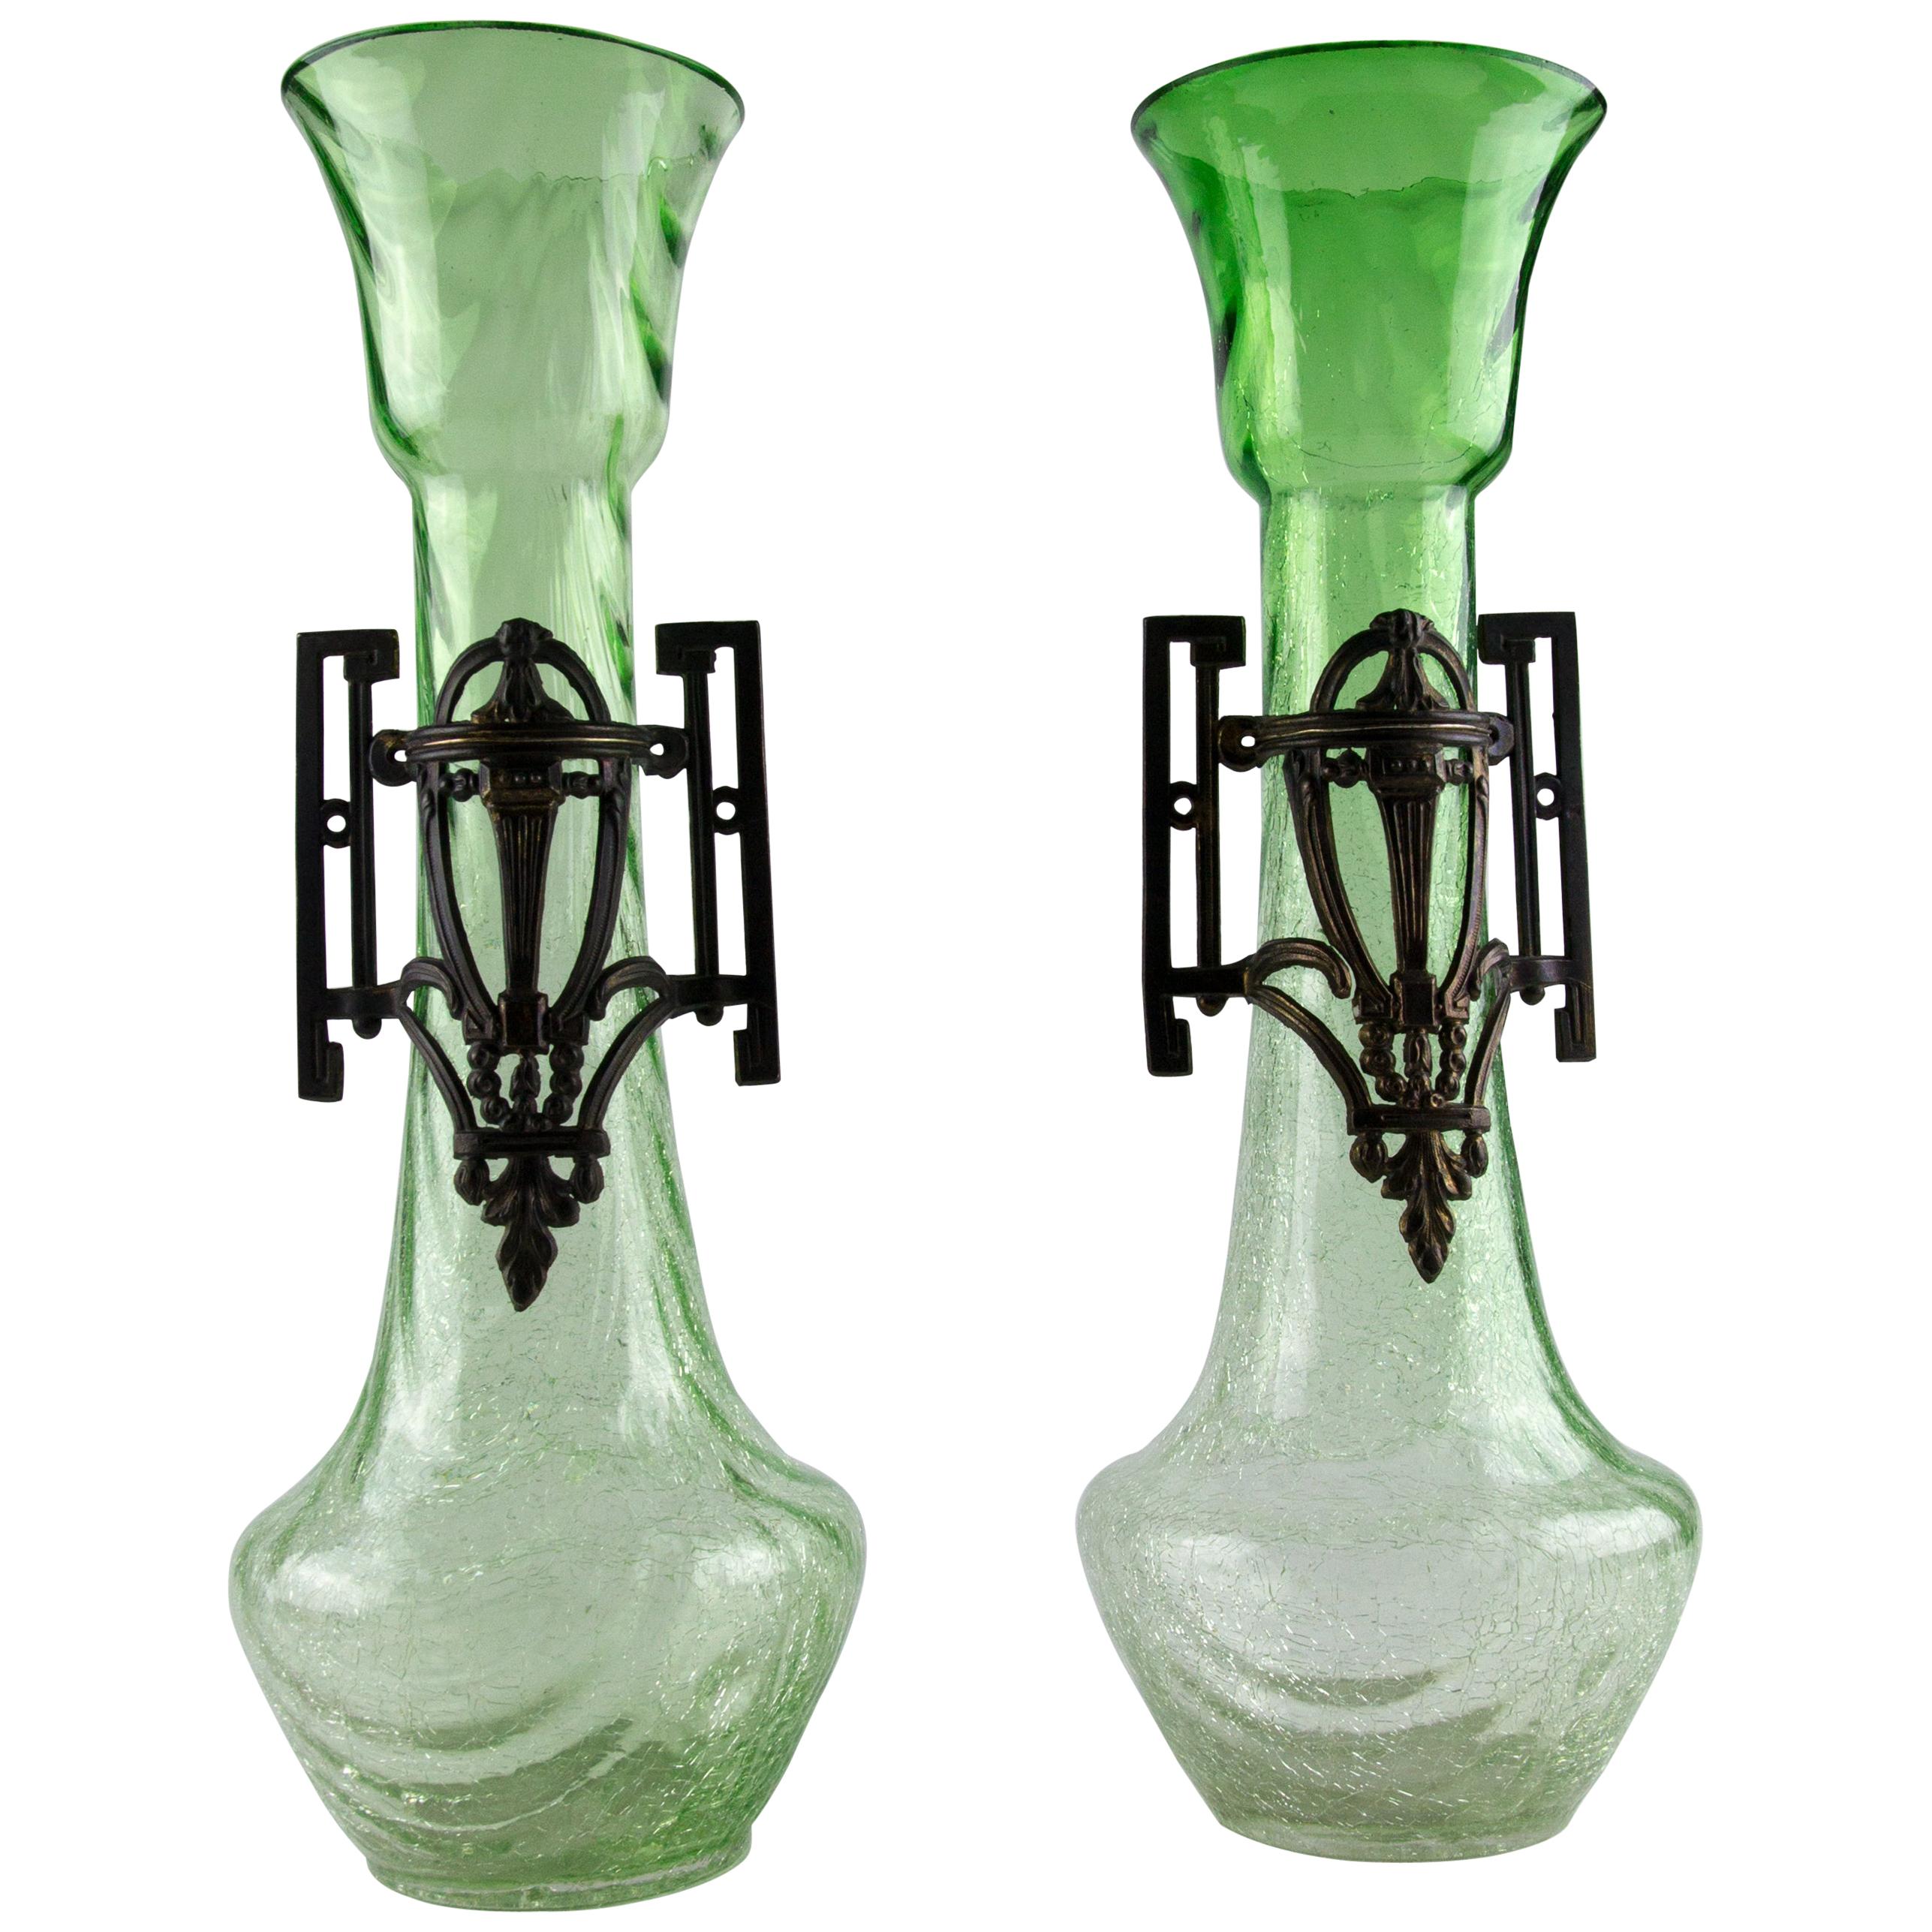 Pair of Large Art Nouveau Green Crackle Glass Vases, circa 1930s For Sale